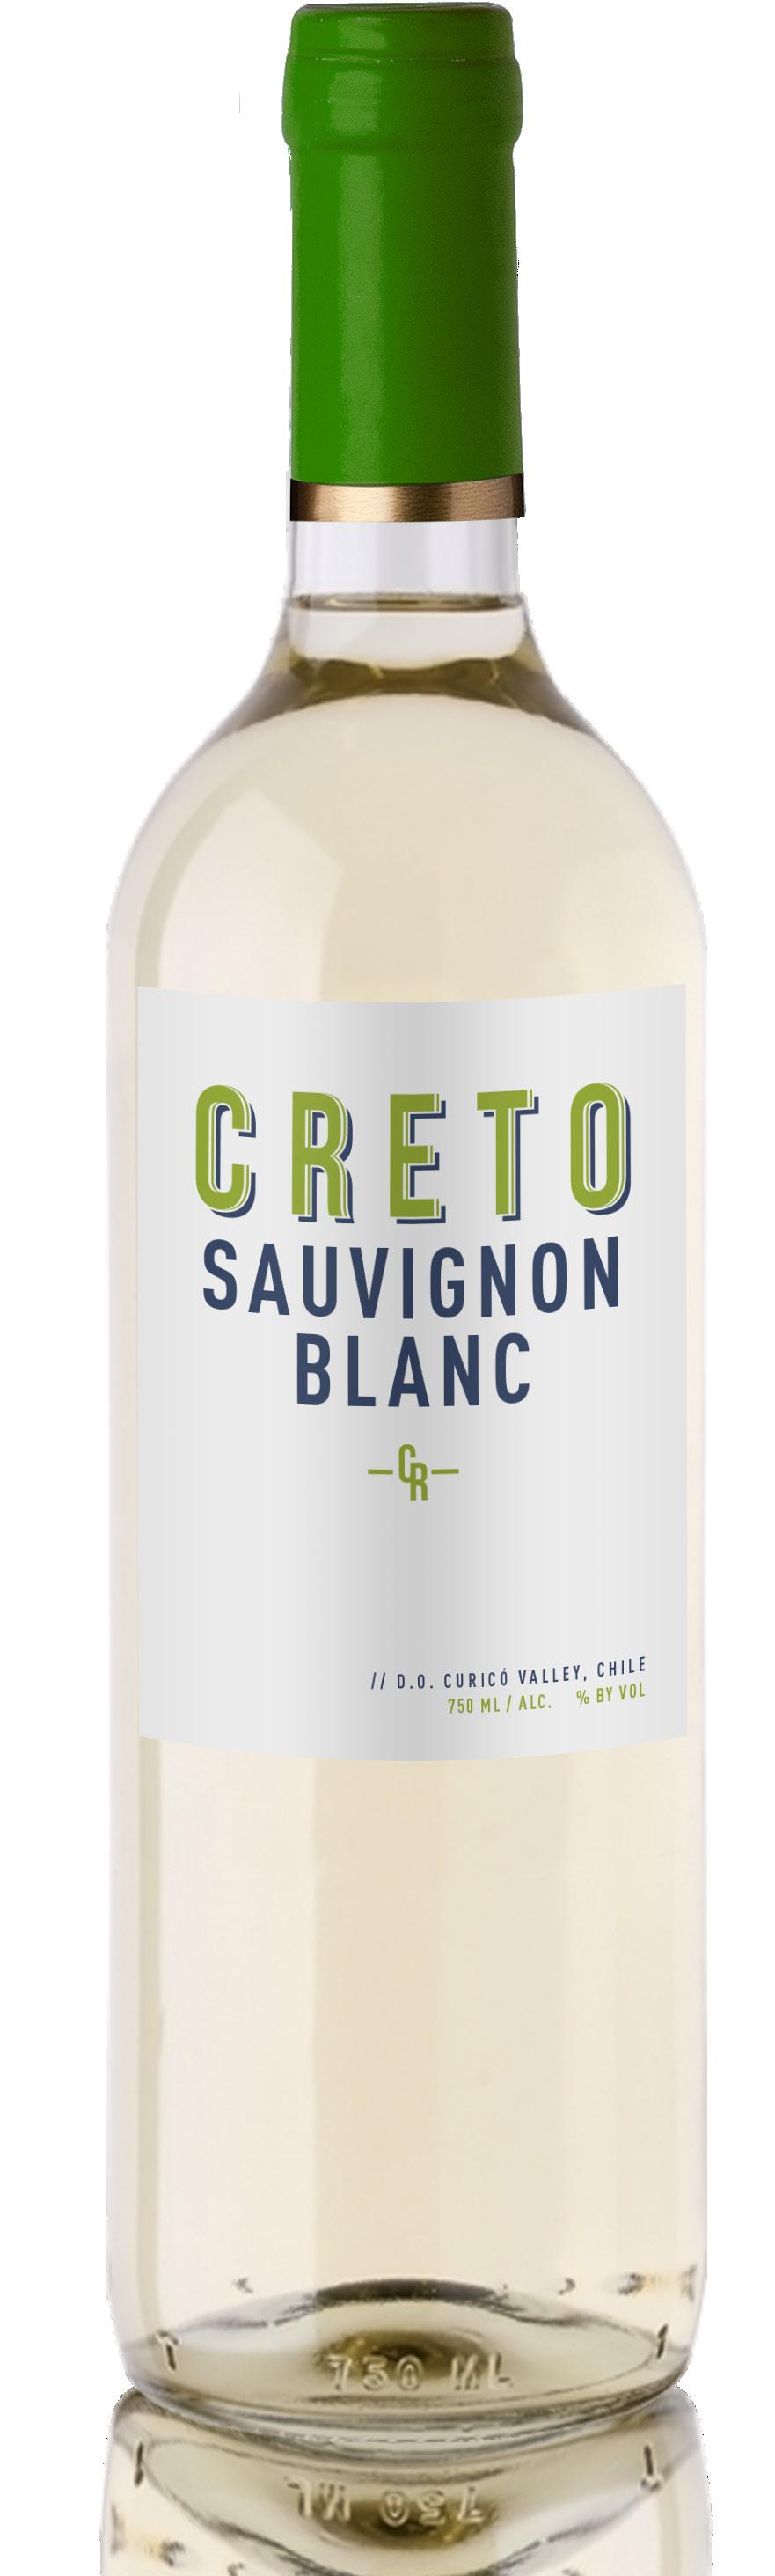 sauvignon blanc 5 ± 0.5 g/lt These vineyards are located slightly closer to the Pacific Ocean and therefore receive coastal breezes that help keeping cool temperatures during summer.